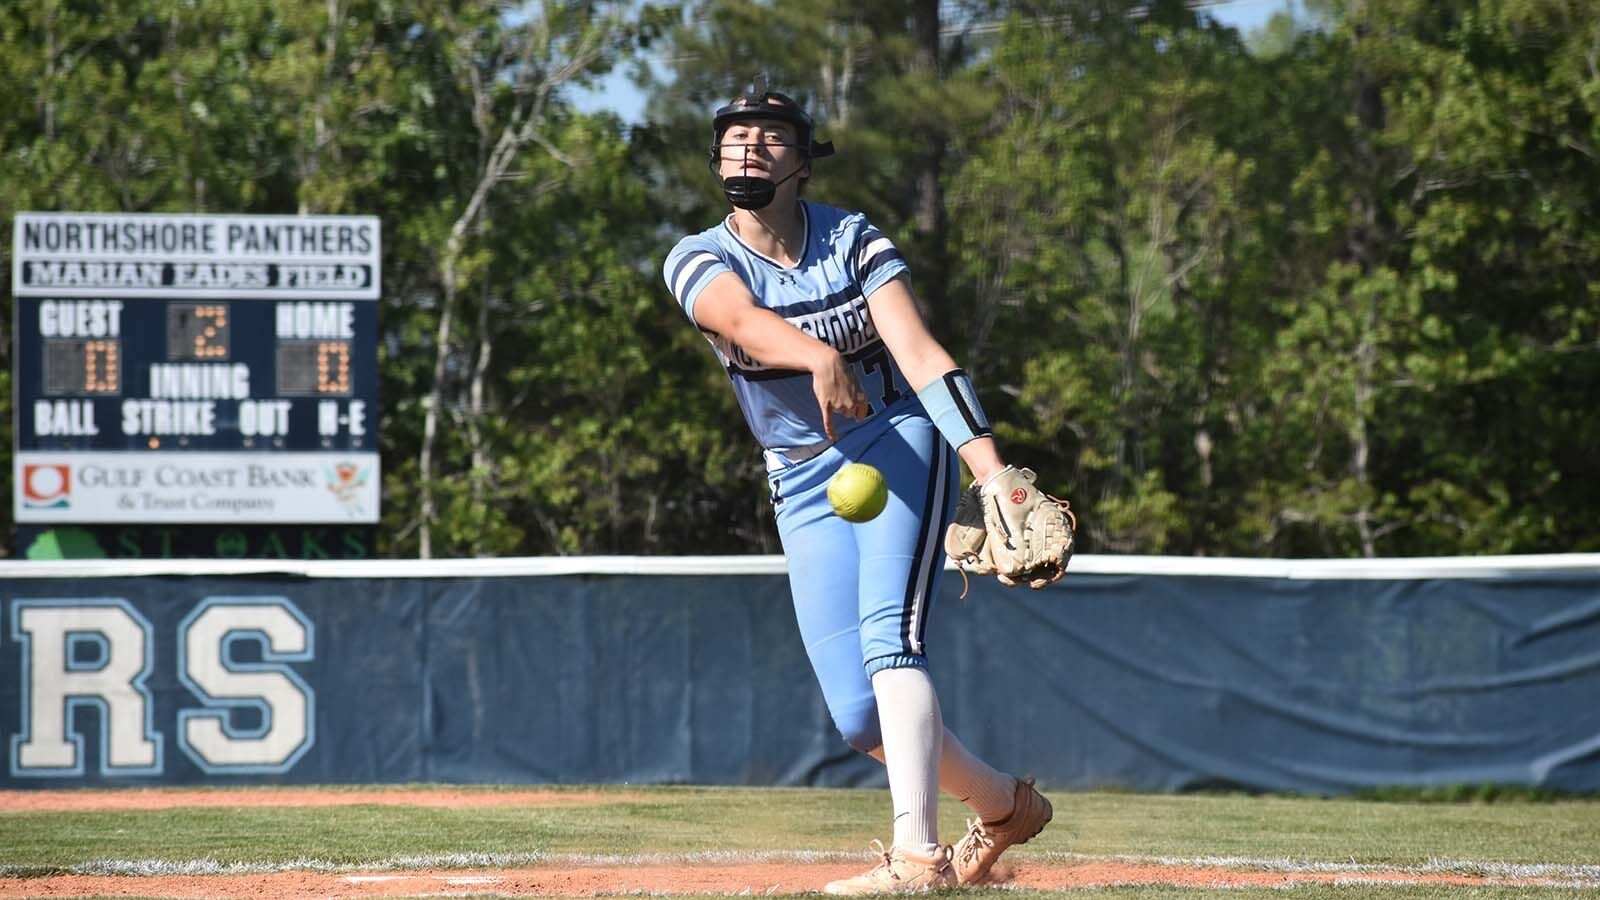 Northshore Softball Victorious with Gritty 5-1 Win over Slidell: Coach Nette’s Strategies Pay Off